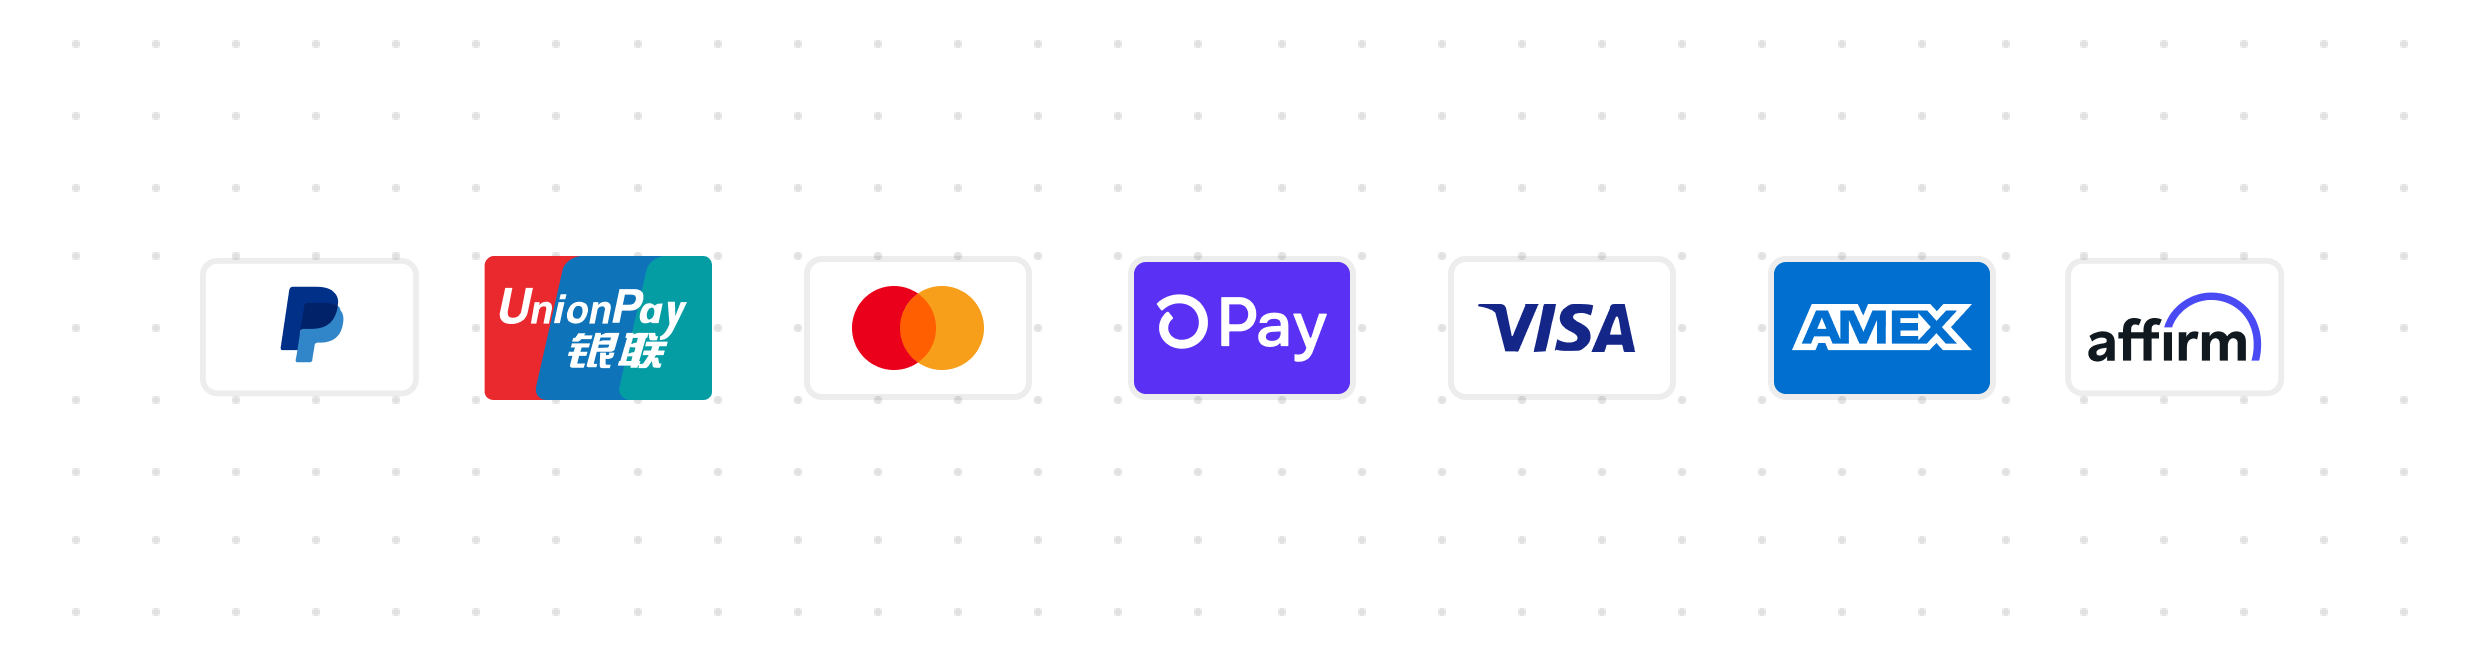 files/paymenticon-thumbnail.png